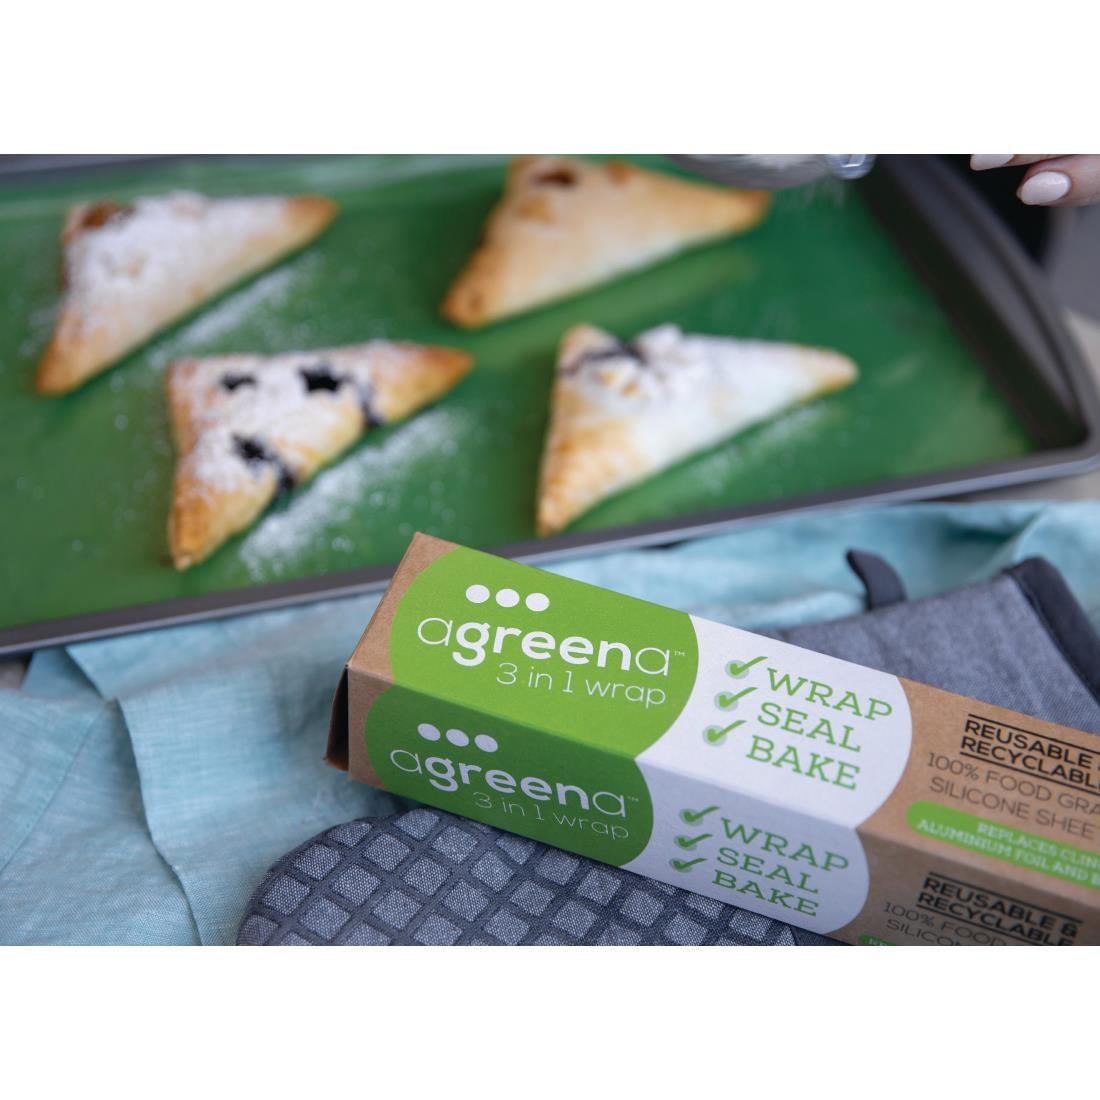 Agreena Three-In-One Reusable Food Wraps 300 x 450mm (Pack of 2) - FD935  - 6